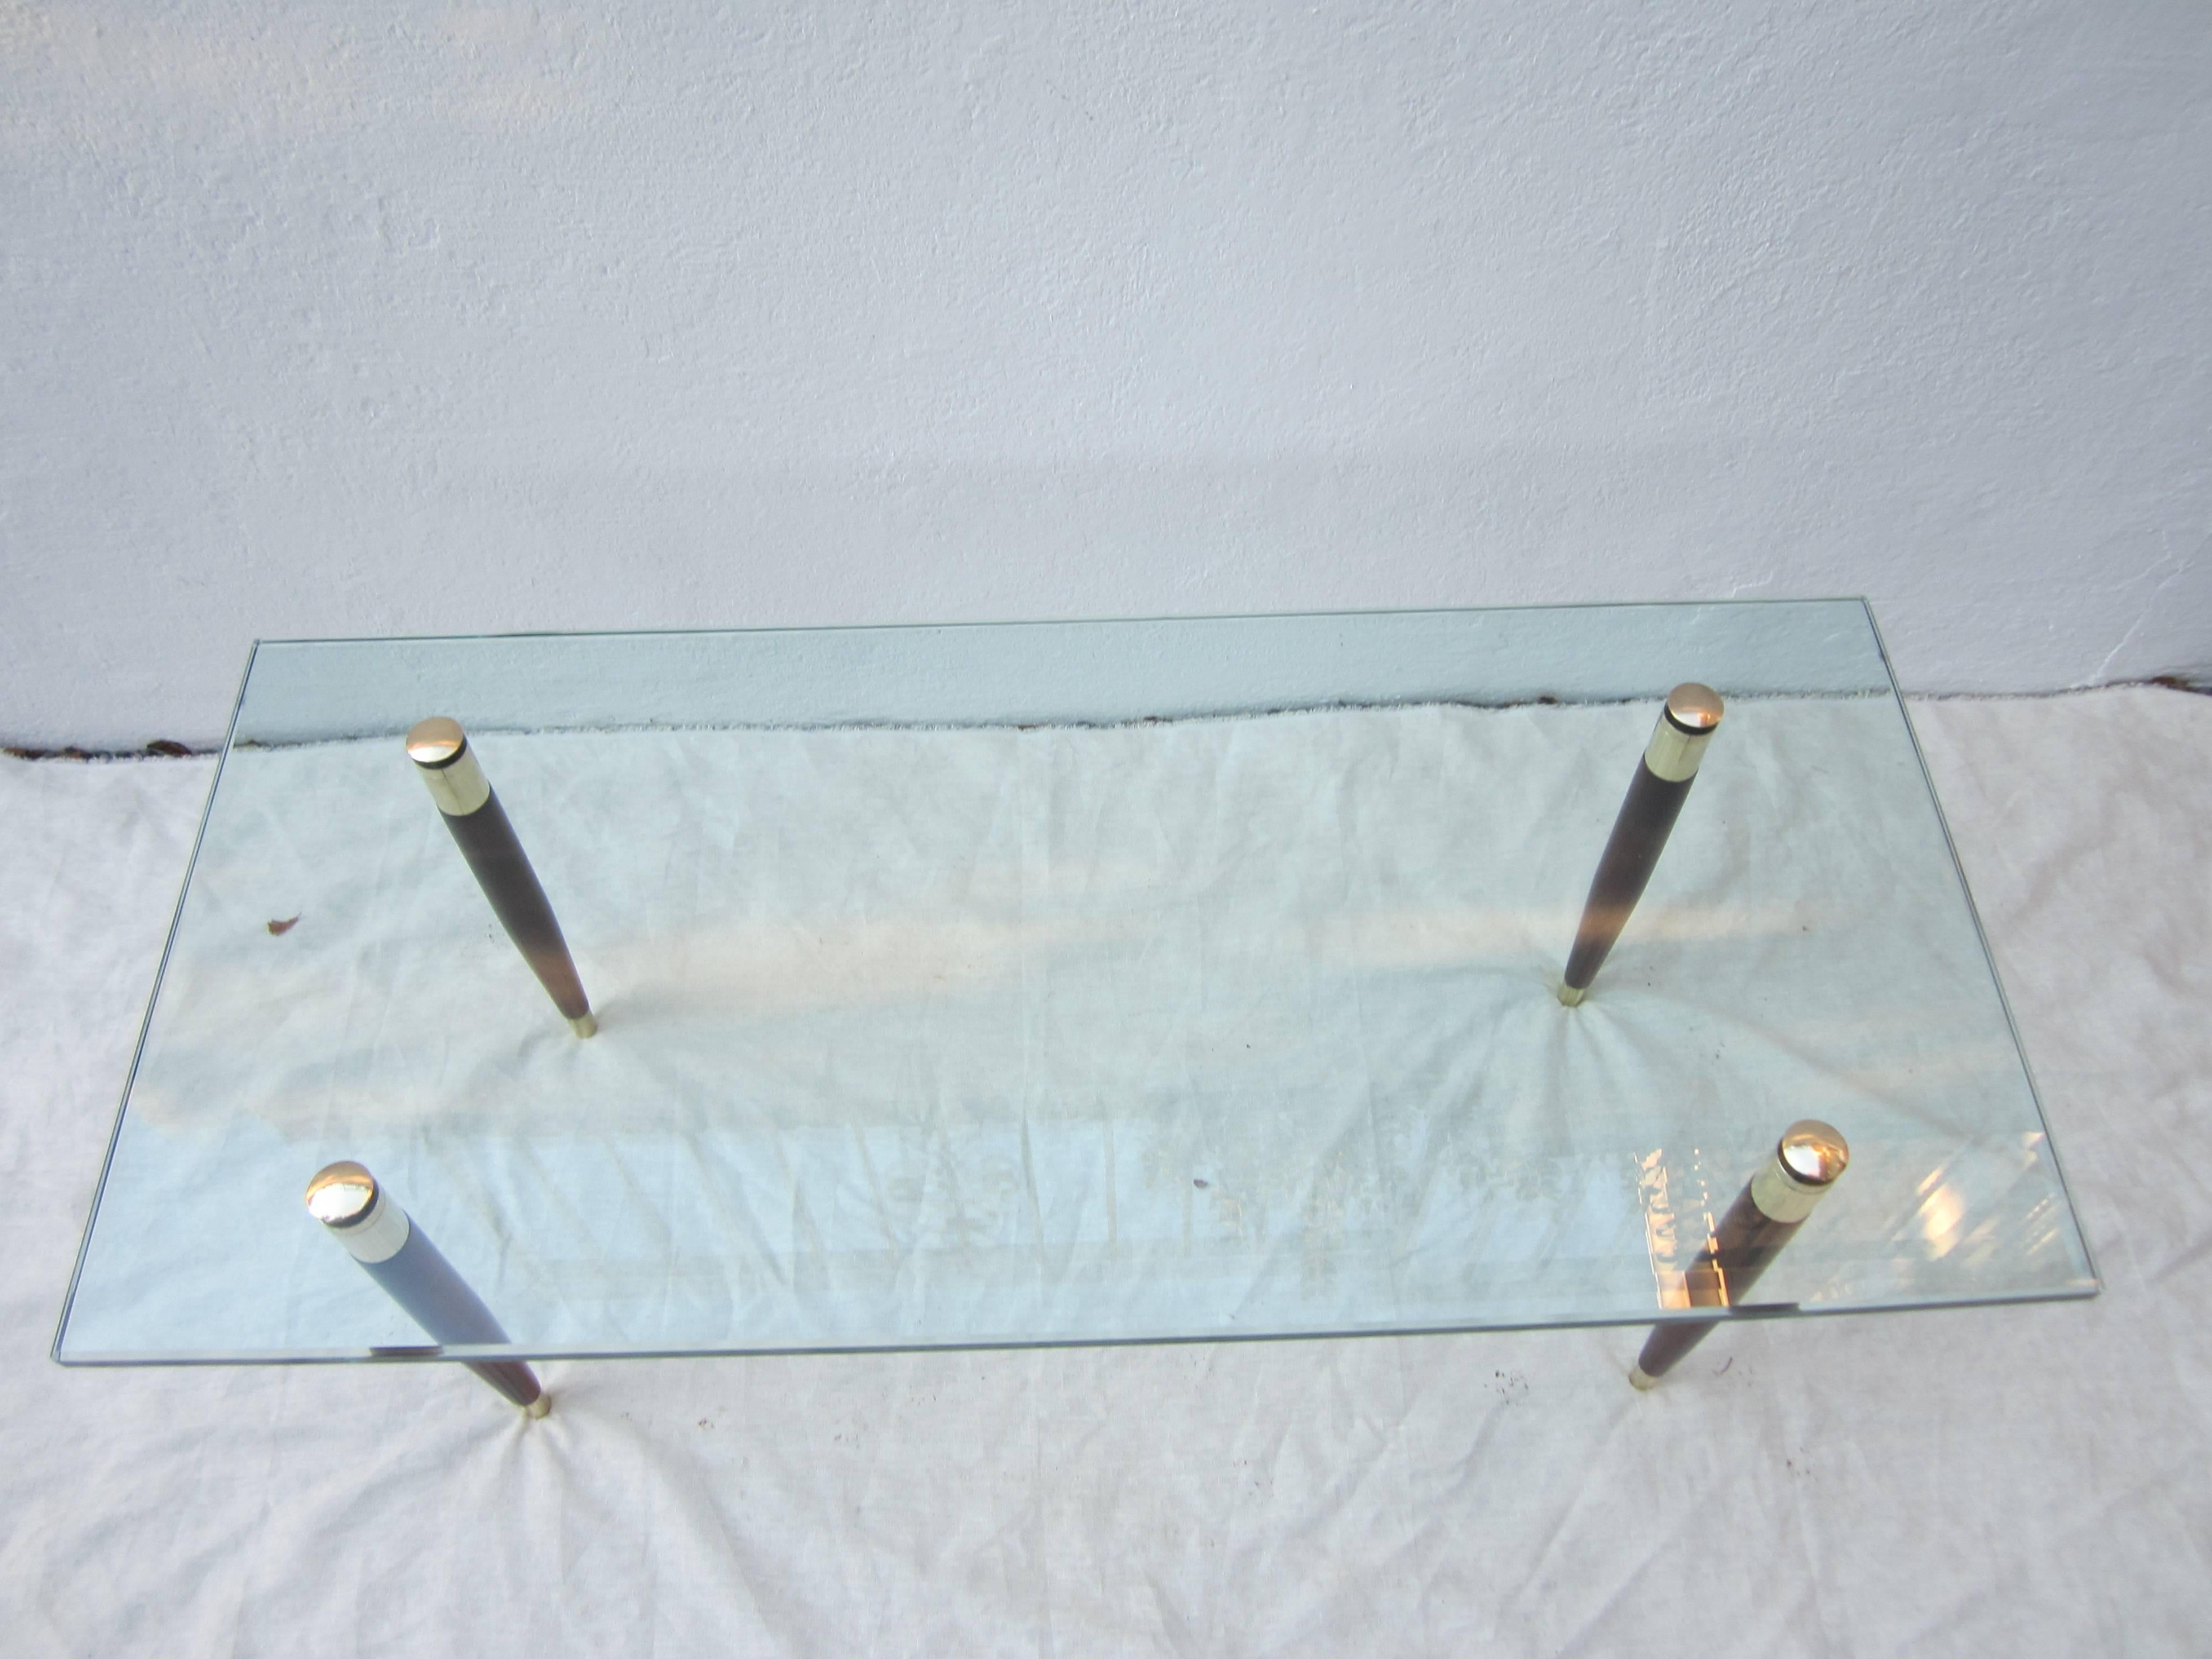 Elegant glass coffee table with brass and mahogany legs that sandwich the glass with brass caps on top. Great looking minimalism. Small chip to glass on underside in the corner, barely visible (see last picture).